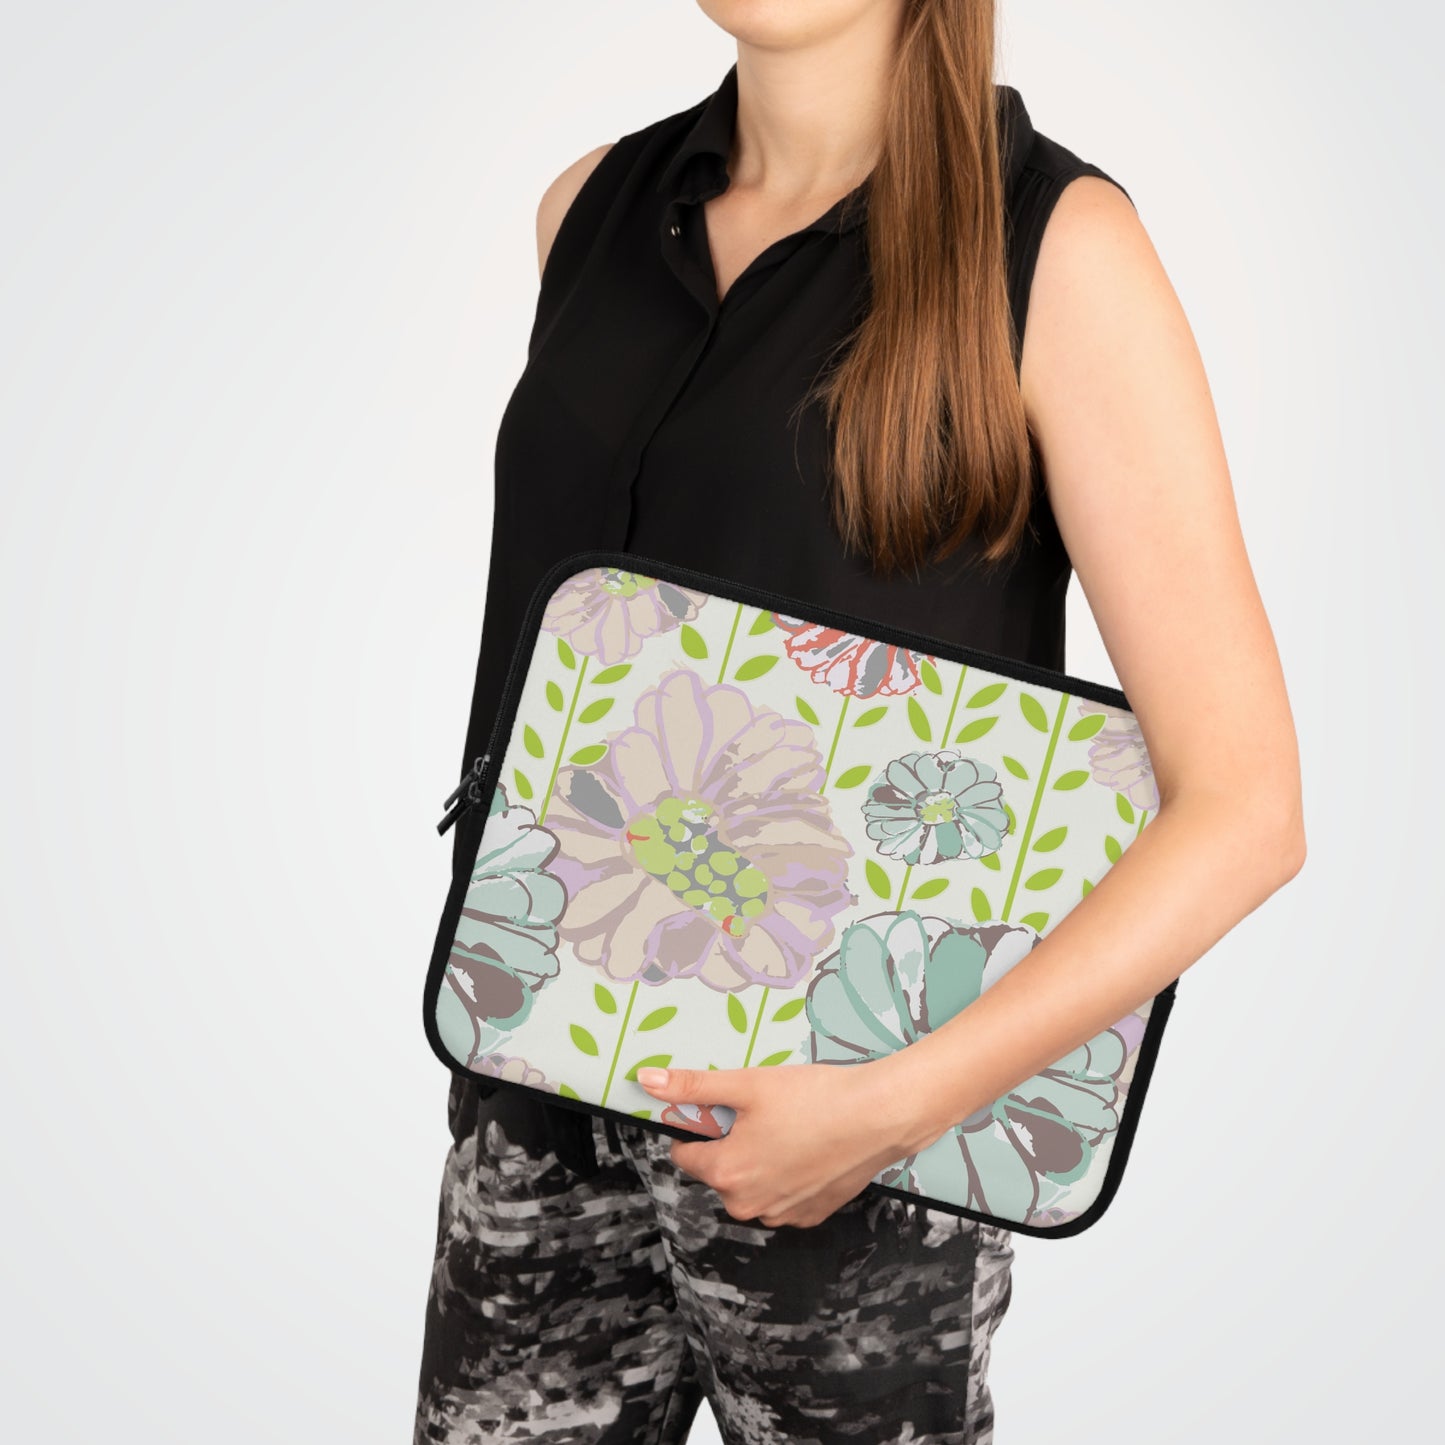 Soft Watercolor Floral Laptop Sleeve